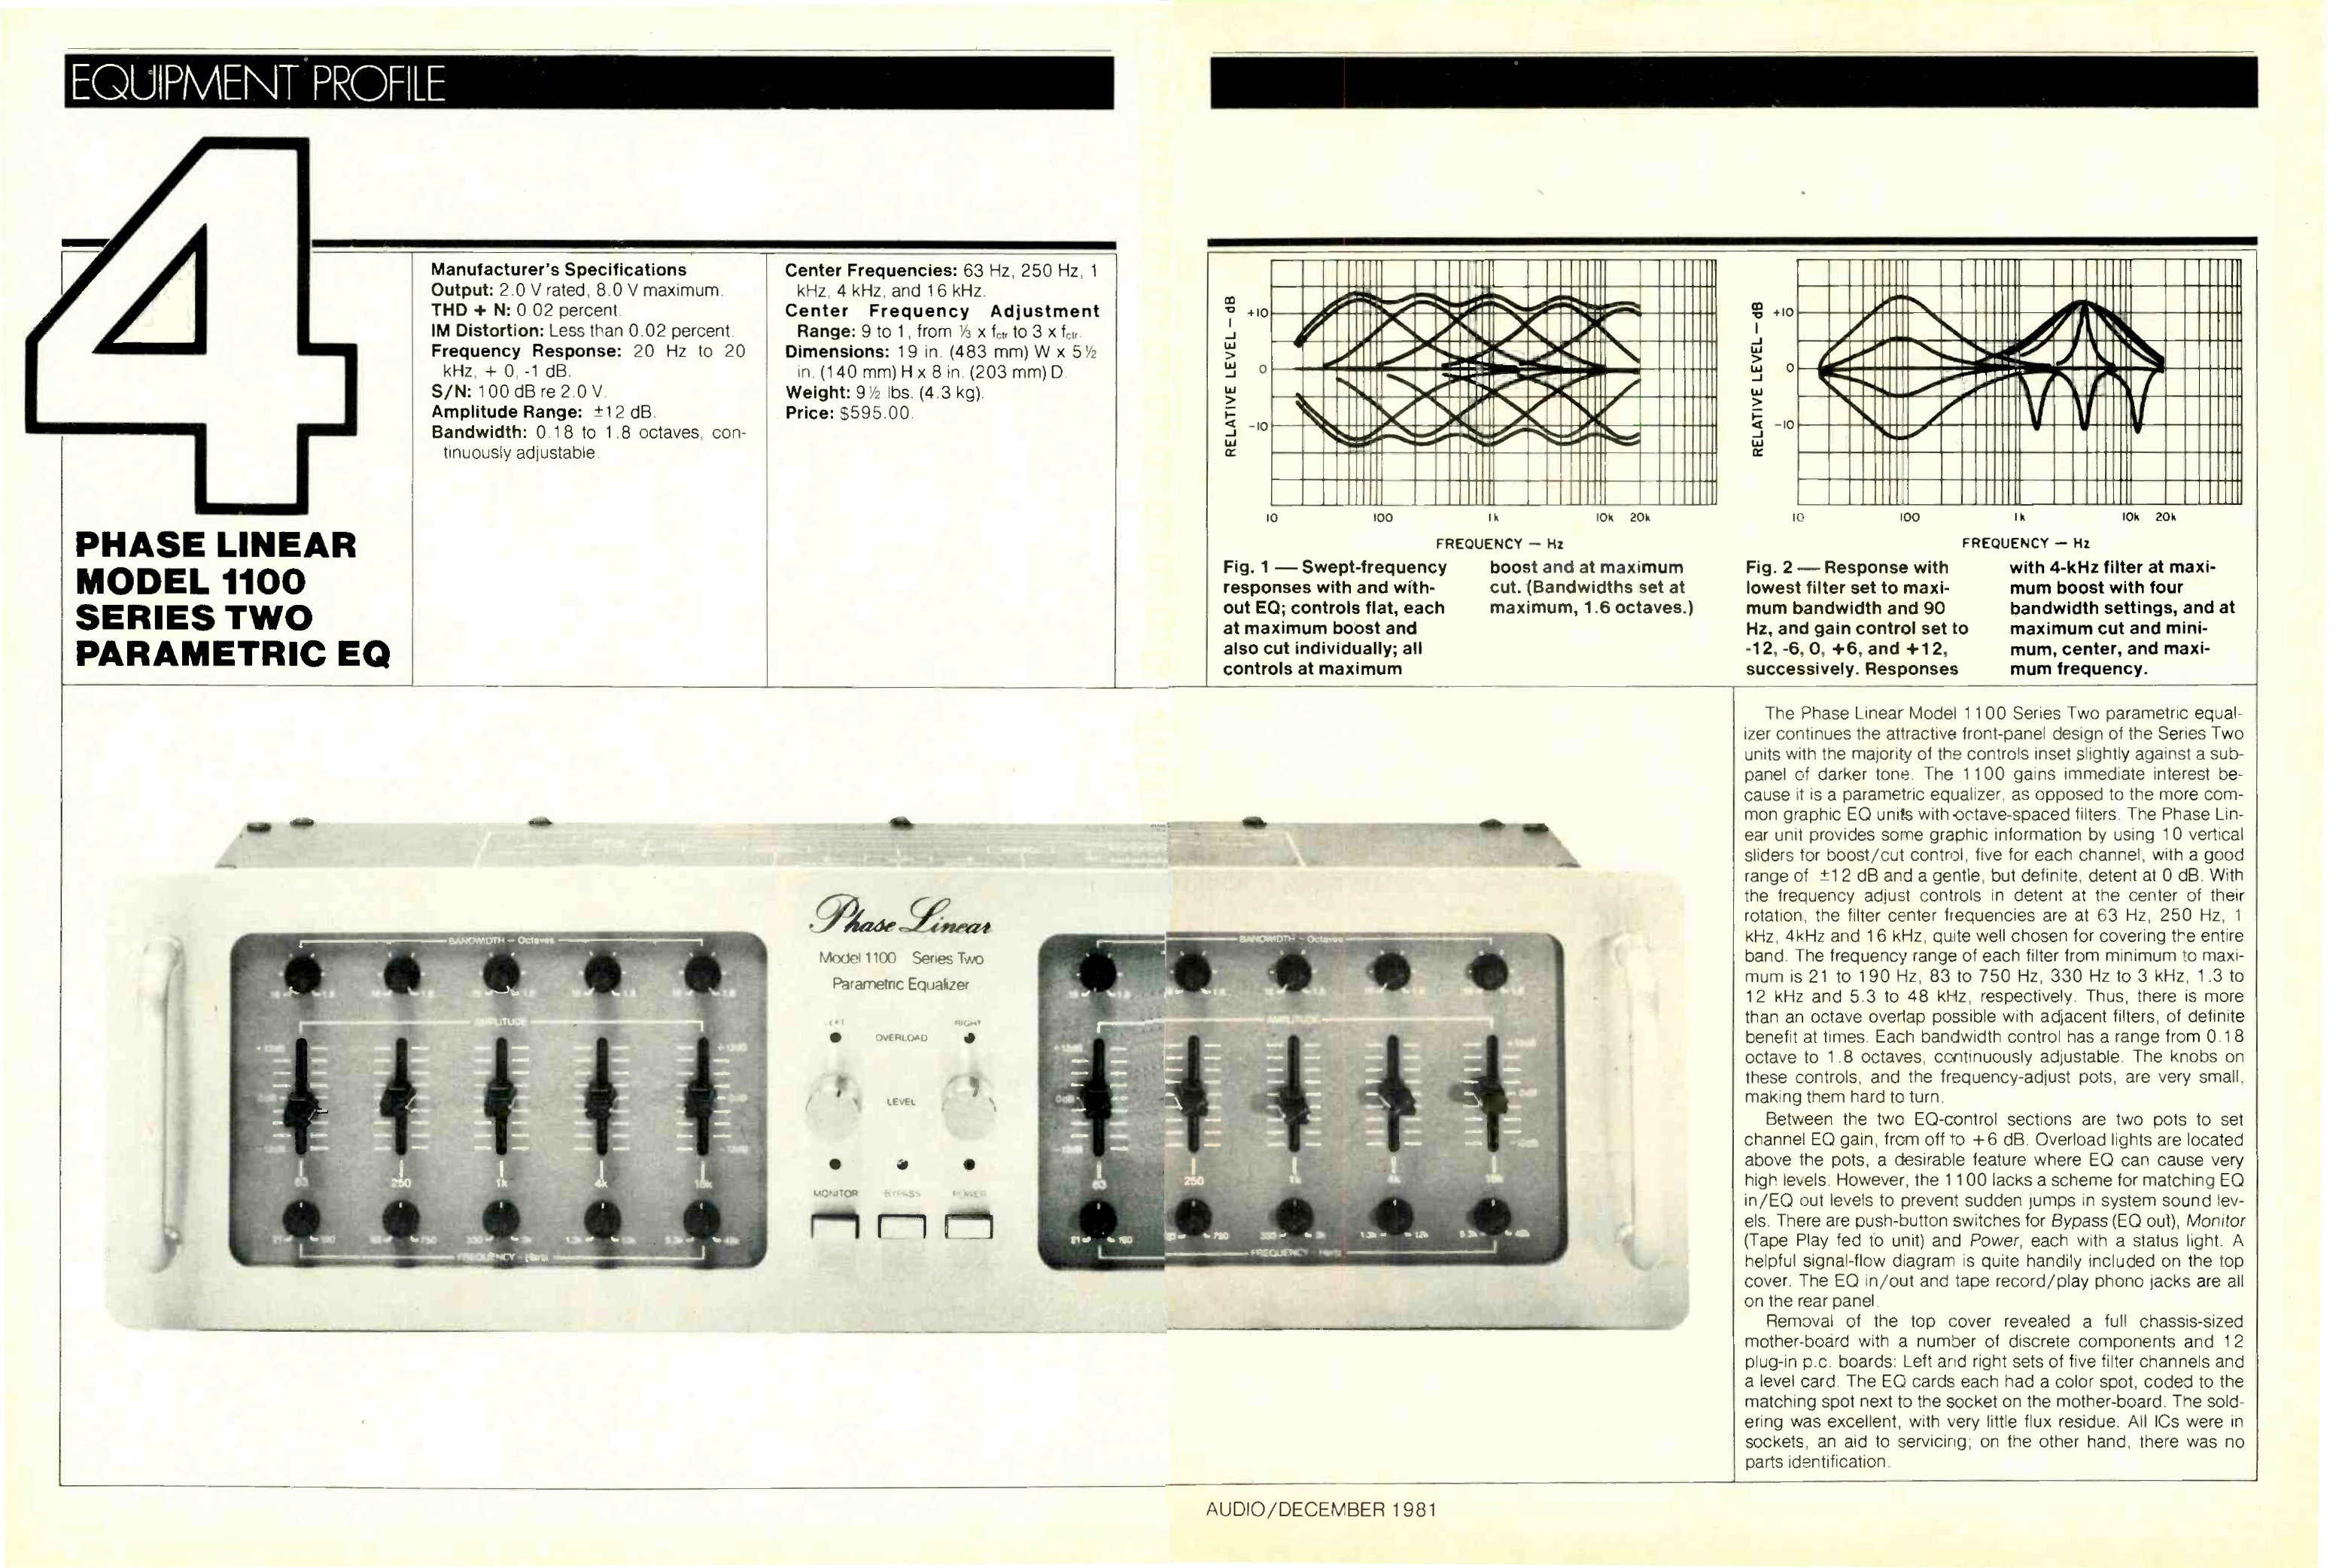 Phase Linear Model-1100-Series-Two-1981.jpg